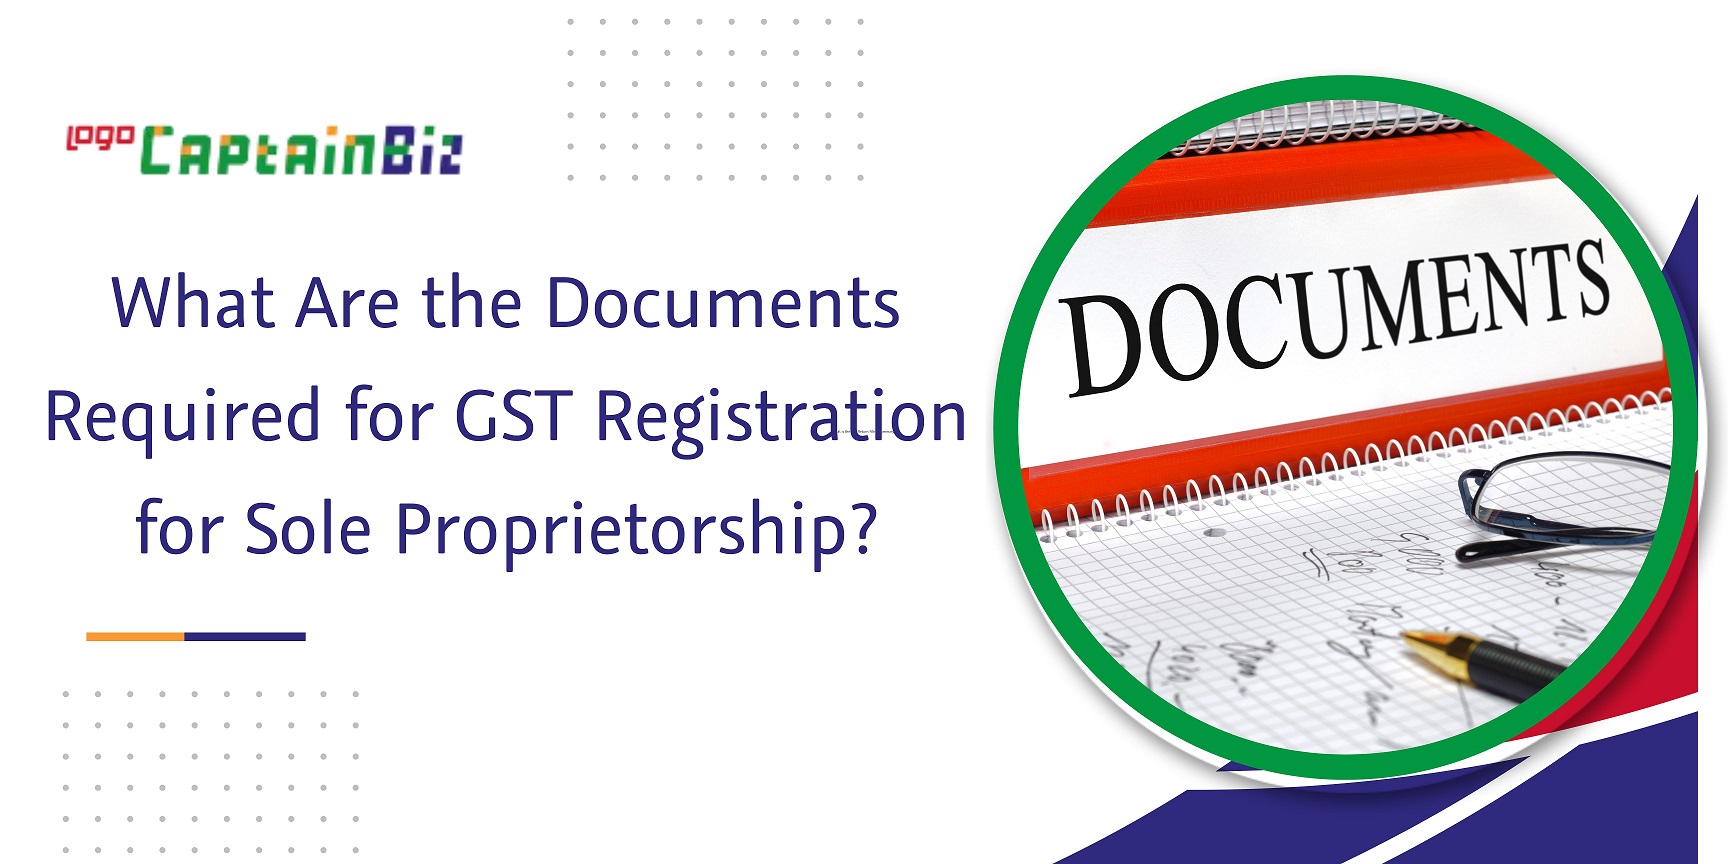 CaptaiBiz: what are the documents required for gst registration for sole proprietorship